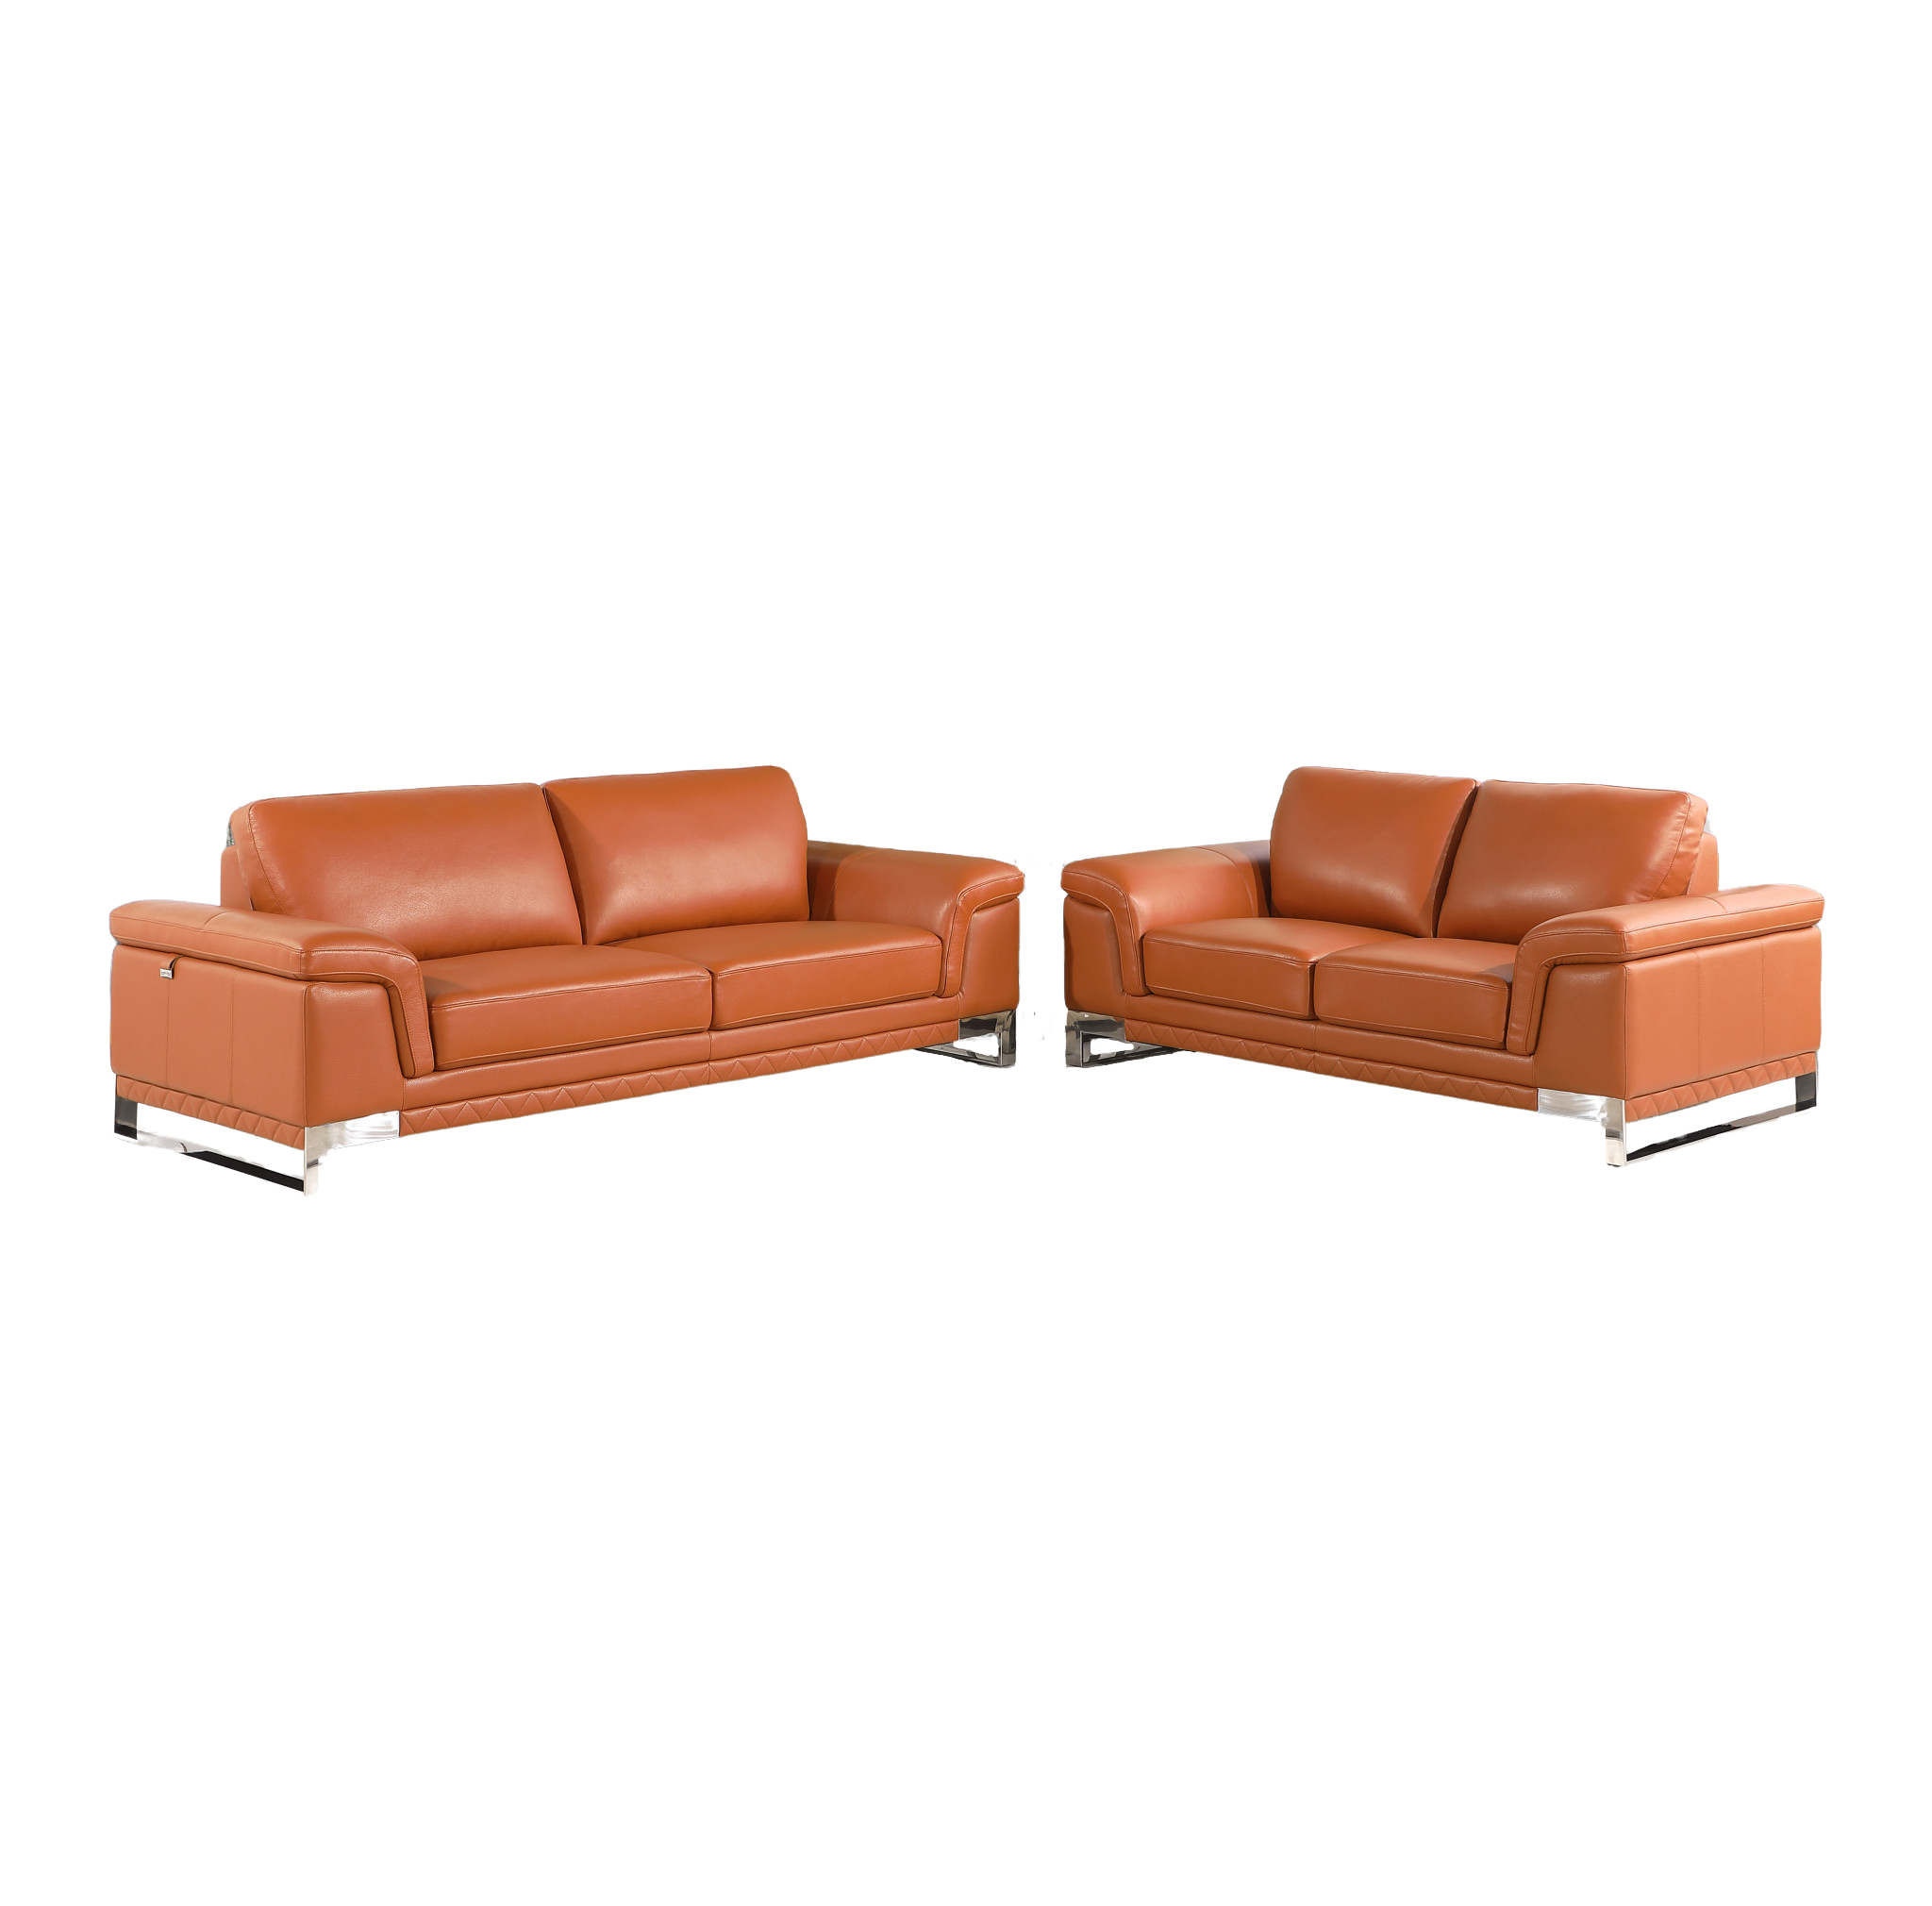 Two Piece Indoor Camel Italian Leather Five Person Seating Set-343882-1